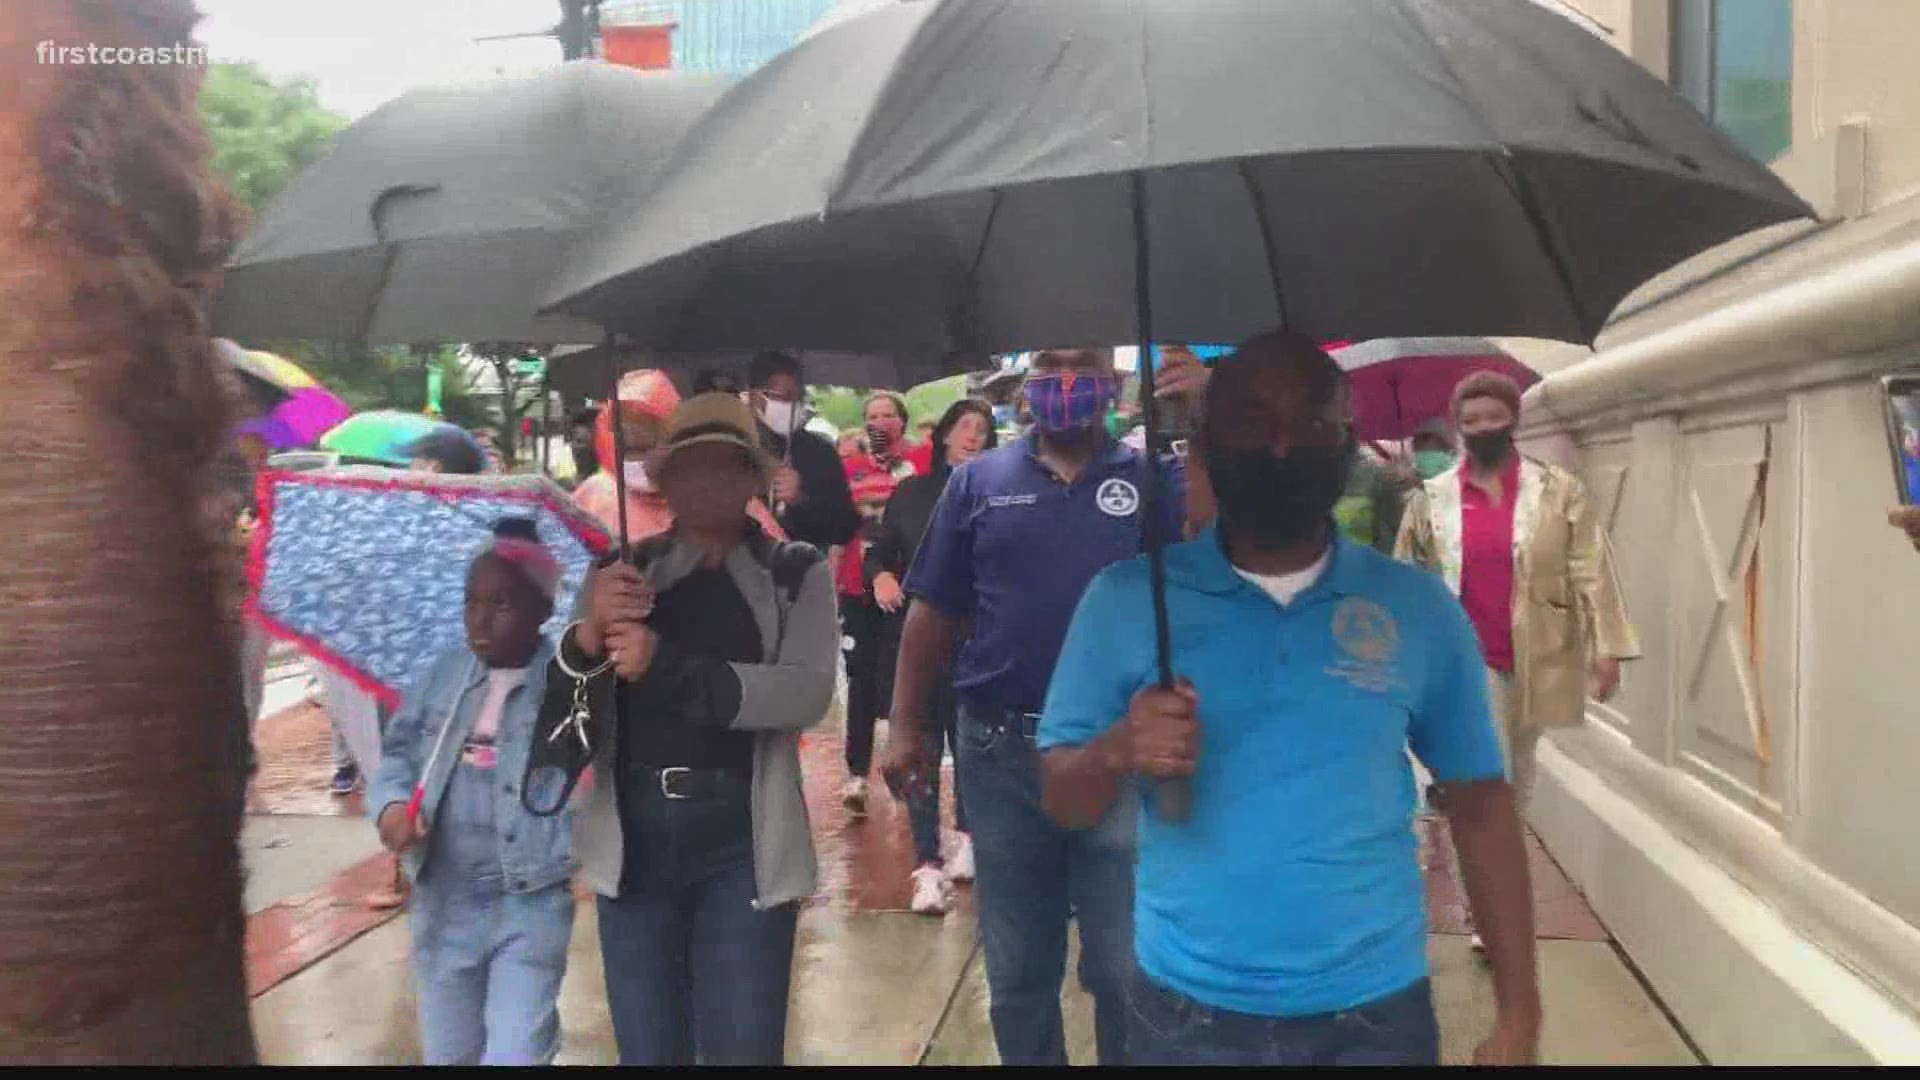 Jacksonville city leaders held a solidarity march downtown despite the rain.